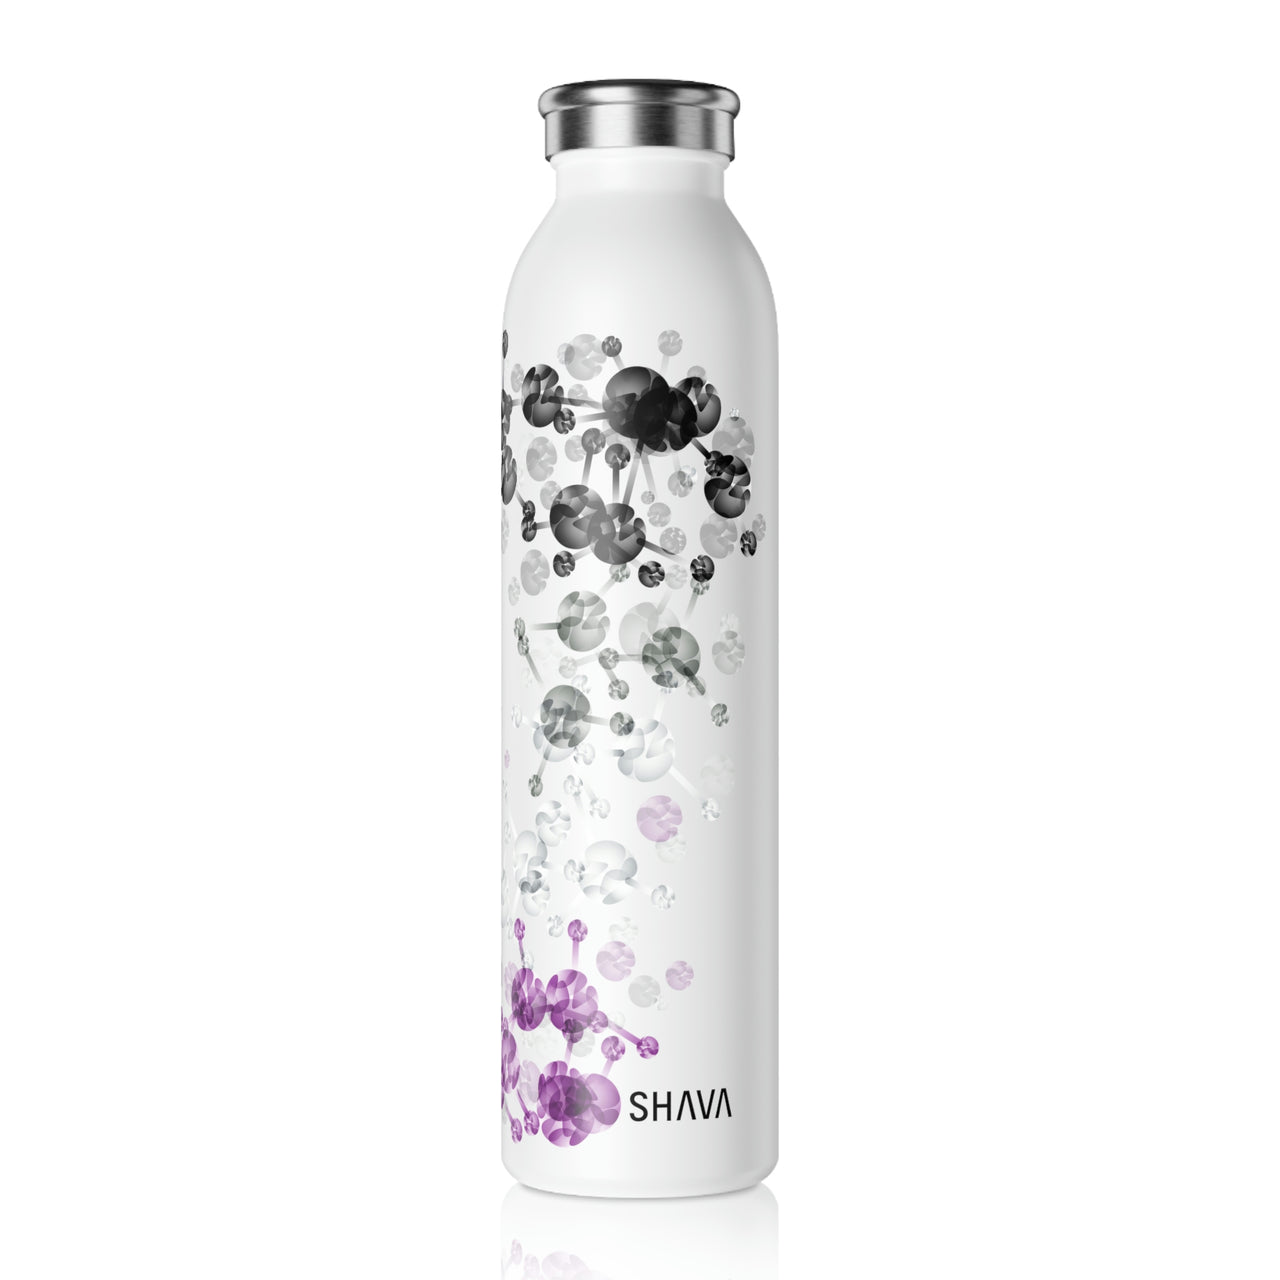 Asexual Flag Slim Water Bottle San Diego Pride - My Rainbow is In My DNA SHAVA CO